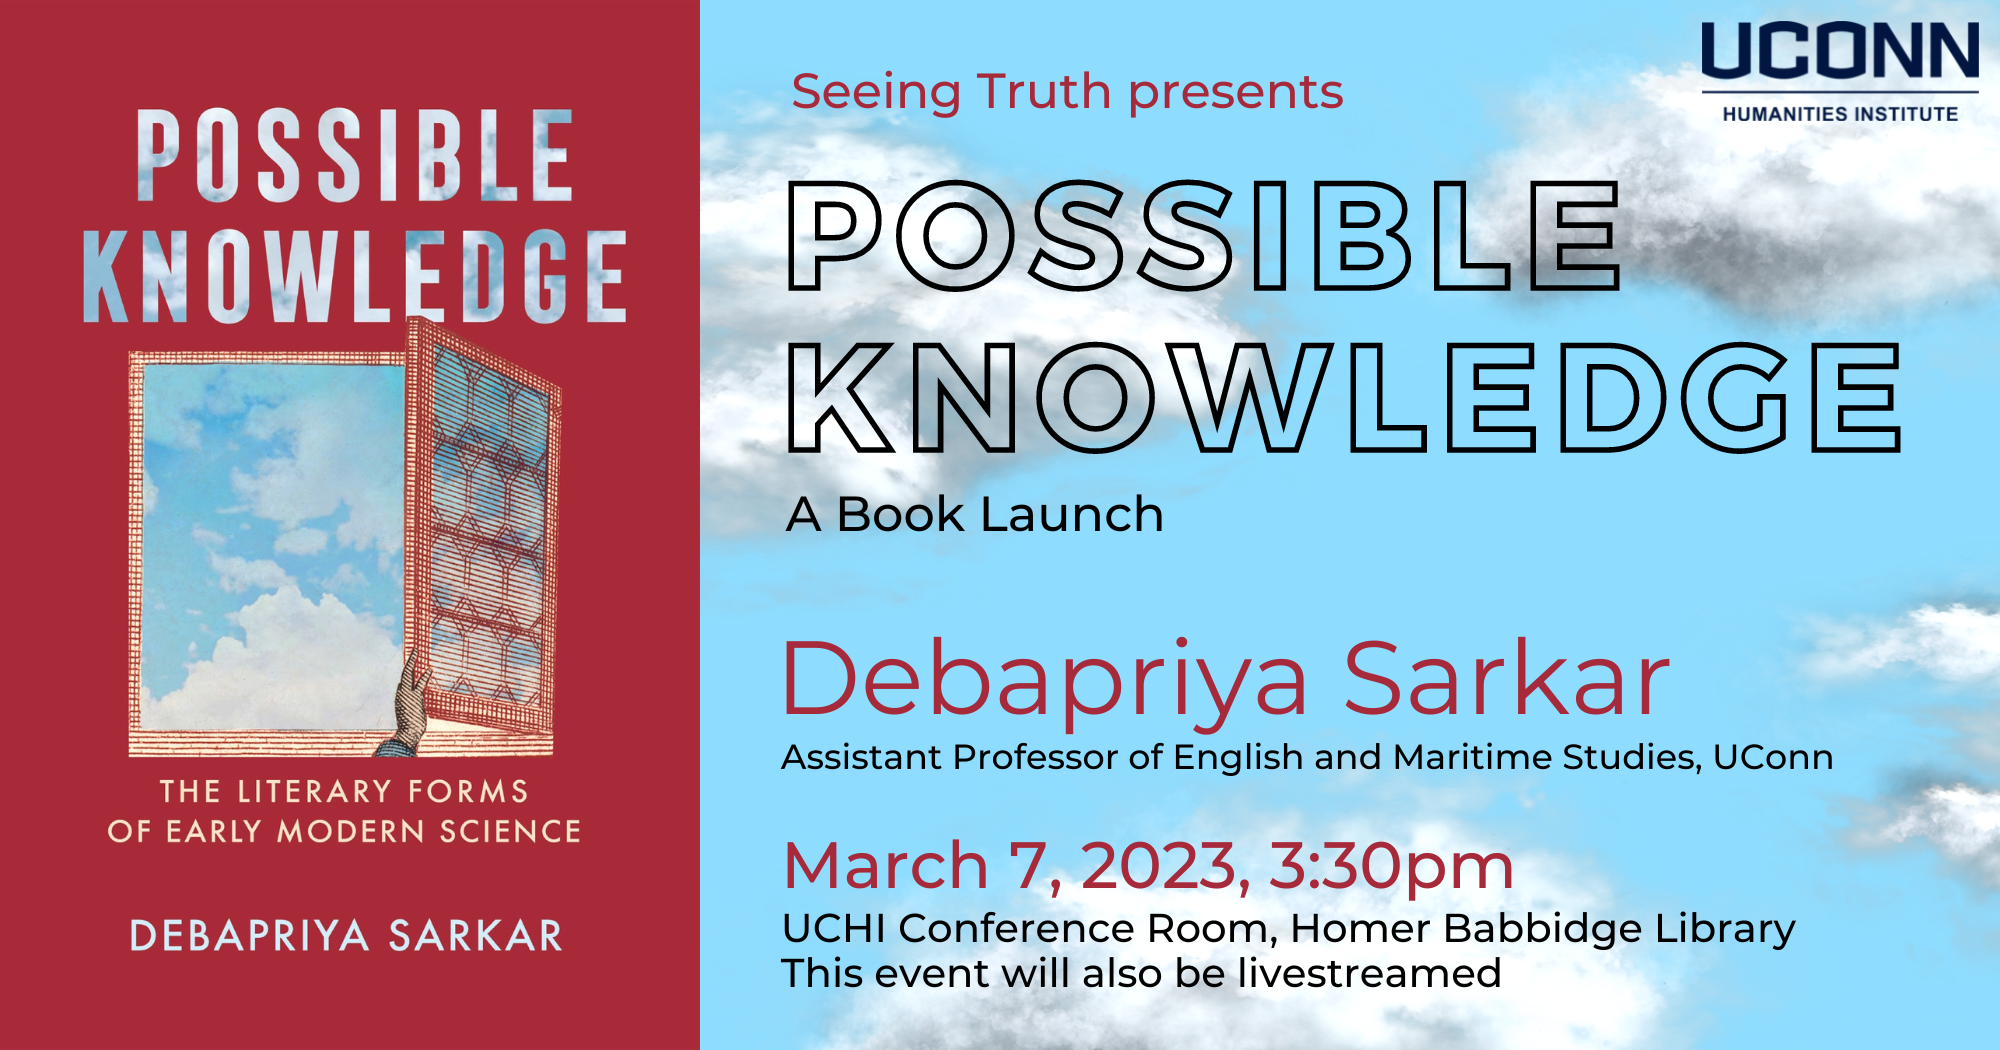 Seeing Truth presents Possible Knowledge, a book launch with Debapriya Sarkar, Assistant Professor of English and Maritime Studies, UConn. March 7, 2023, 3:30pm. UCHI Conference Room, Homer Babbidge Library. This event will also be livestreamed.